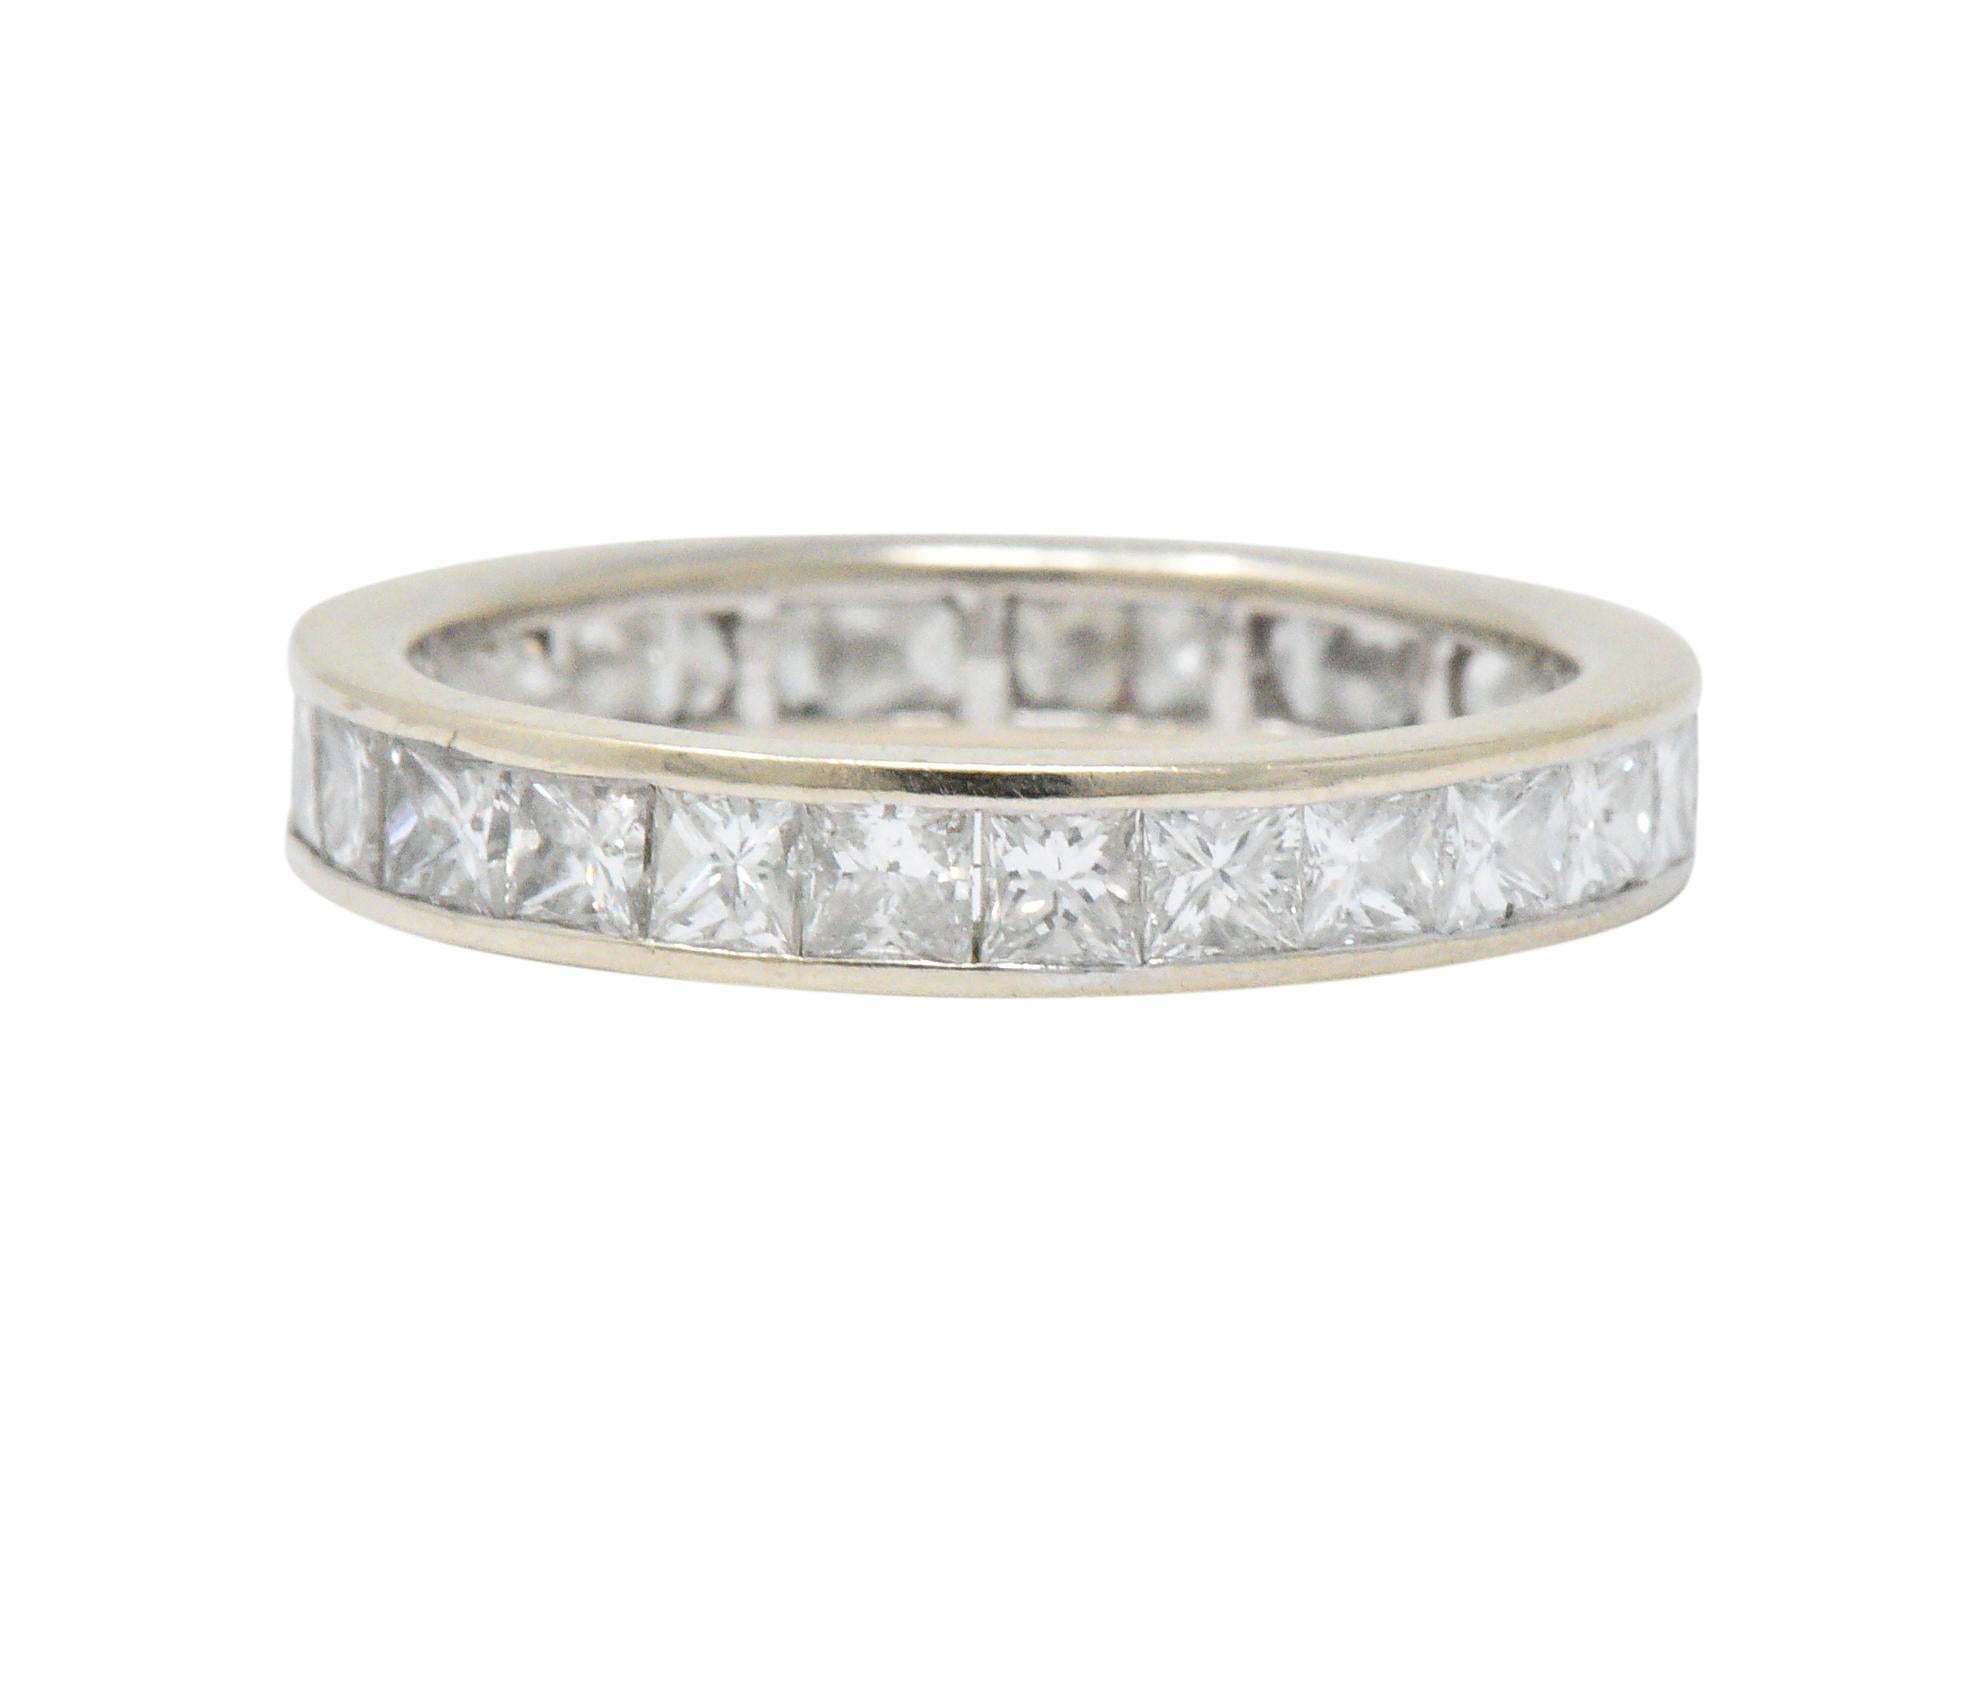 Sleek band style ring channel set fully around with princess cut diamonds

Weighing approximately 1.80 carats with H/I color and VS clarity

Tested as 14 karat white gold

Circa: 1990s

Ring Size: 5 3/4 & not sizable

Measures: 3.3 mm wide and sits